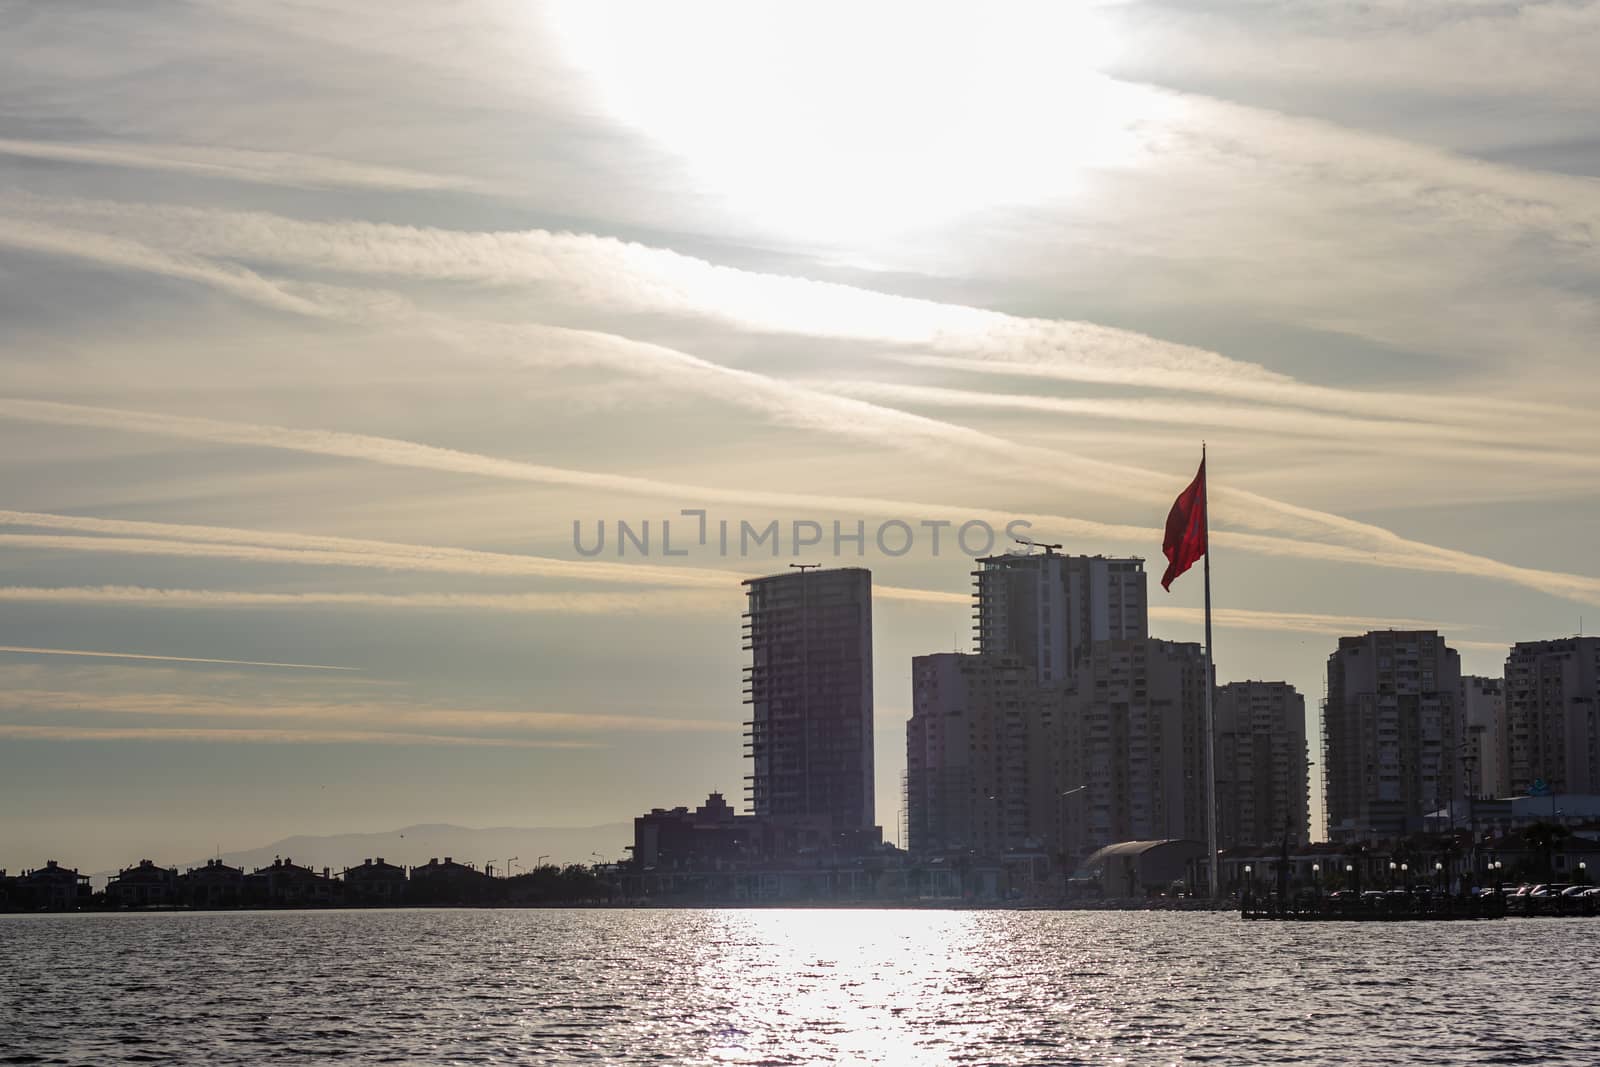 a cityscape shoot with low shutter speed - sun is shining above. photo has taken at izmir/turkey.